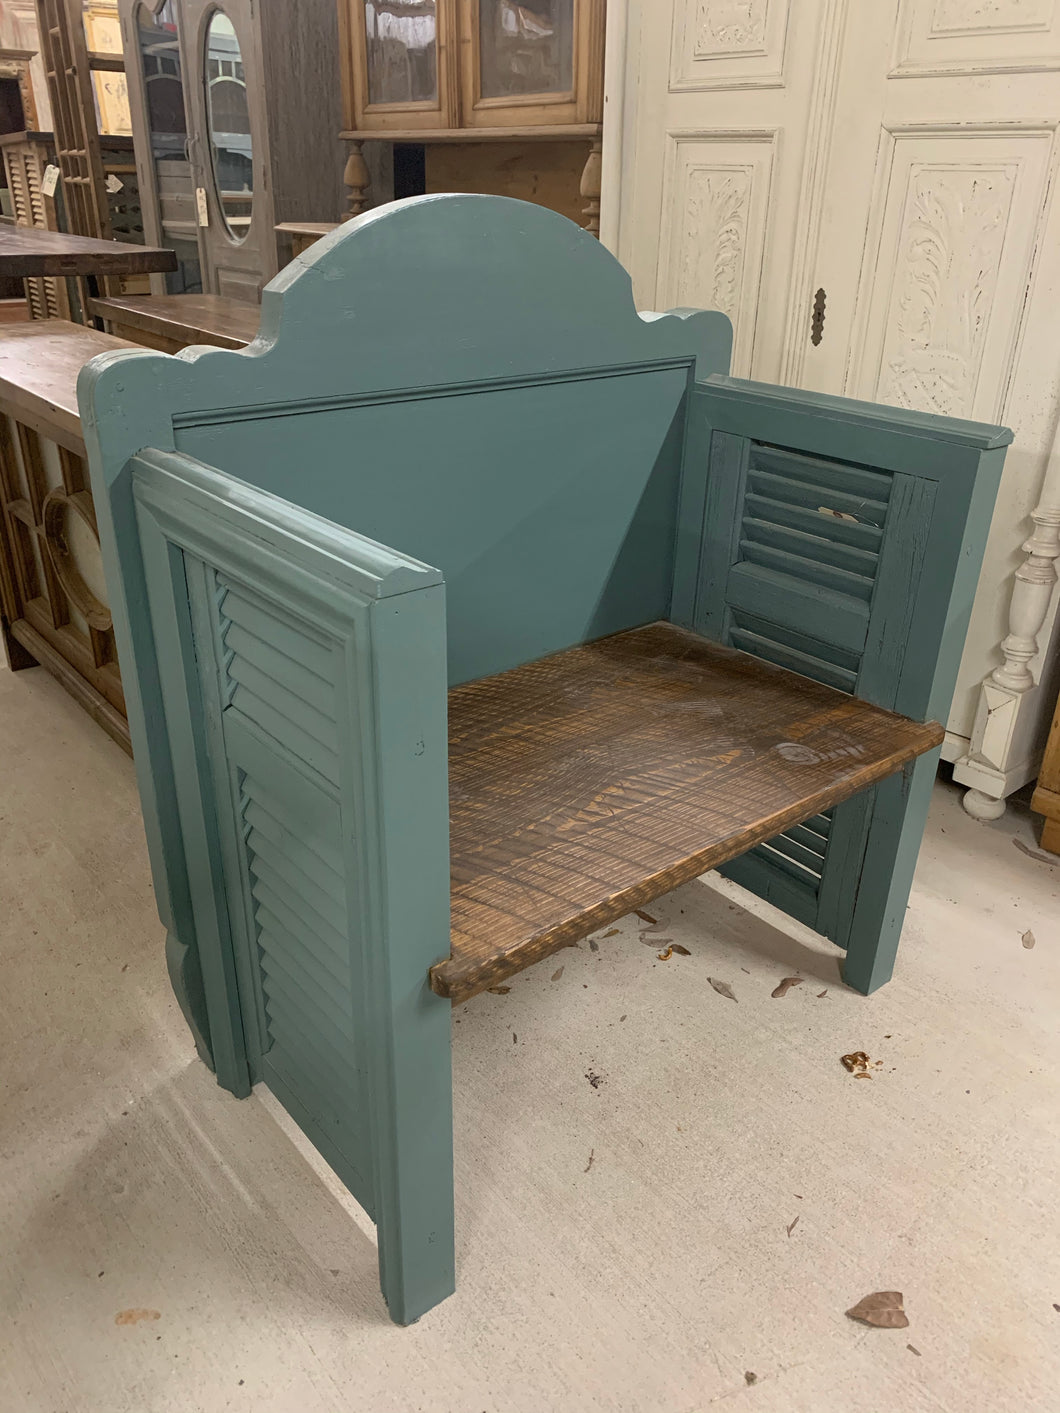 Small Bench made with European Twin Bed and French Shutters